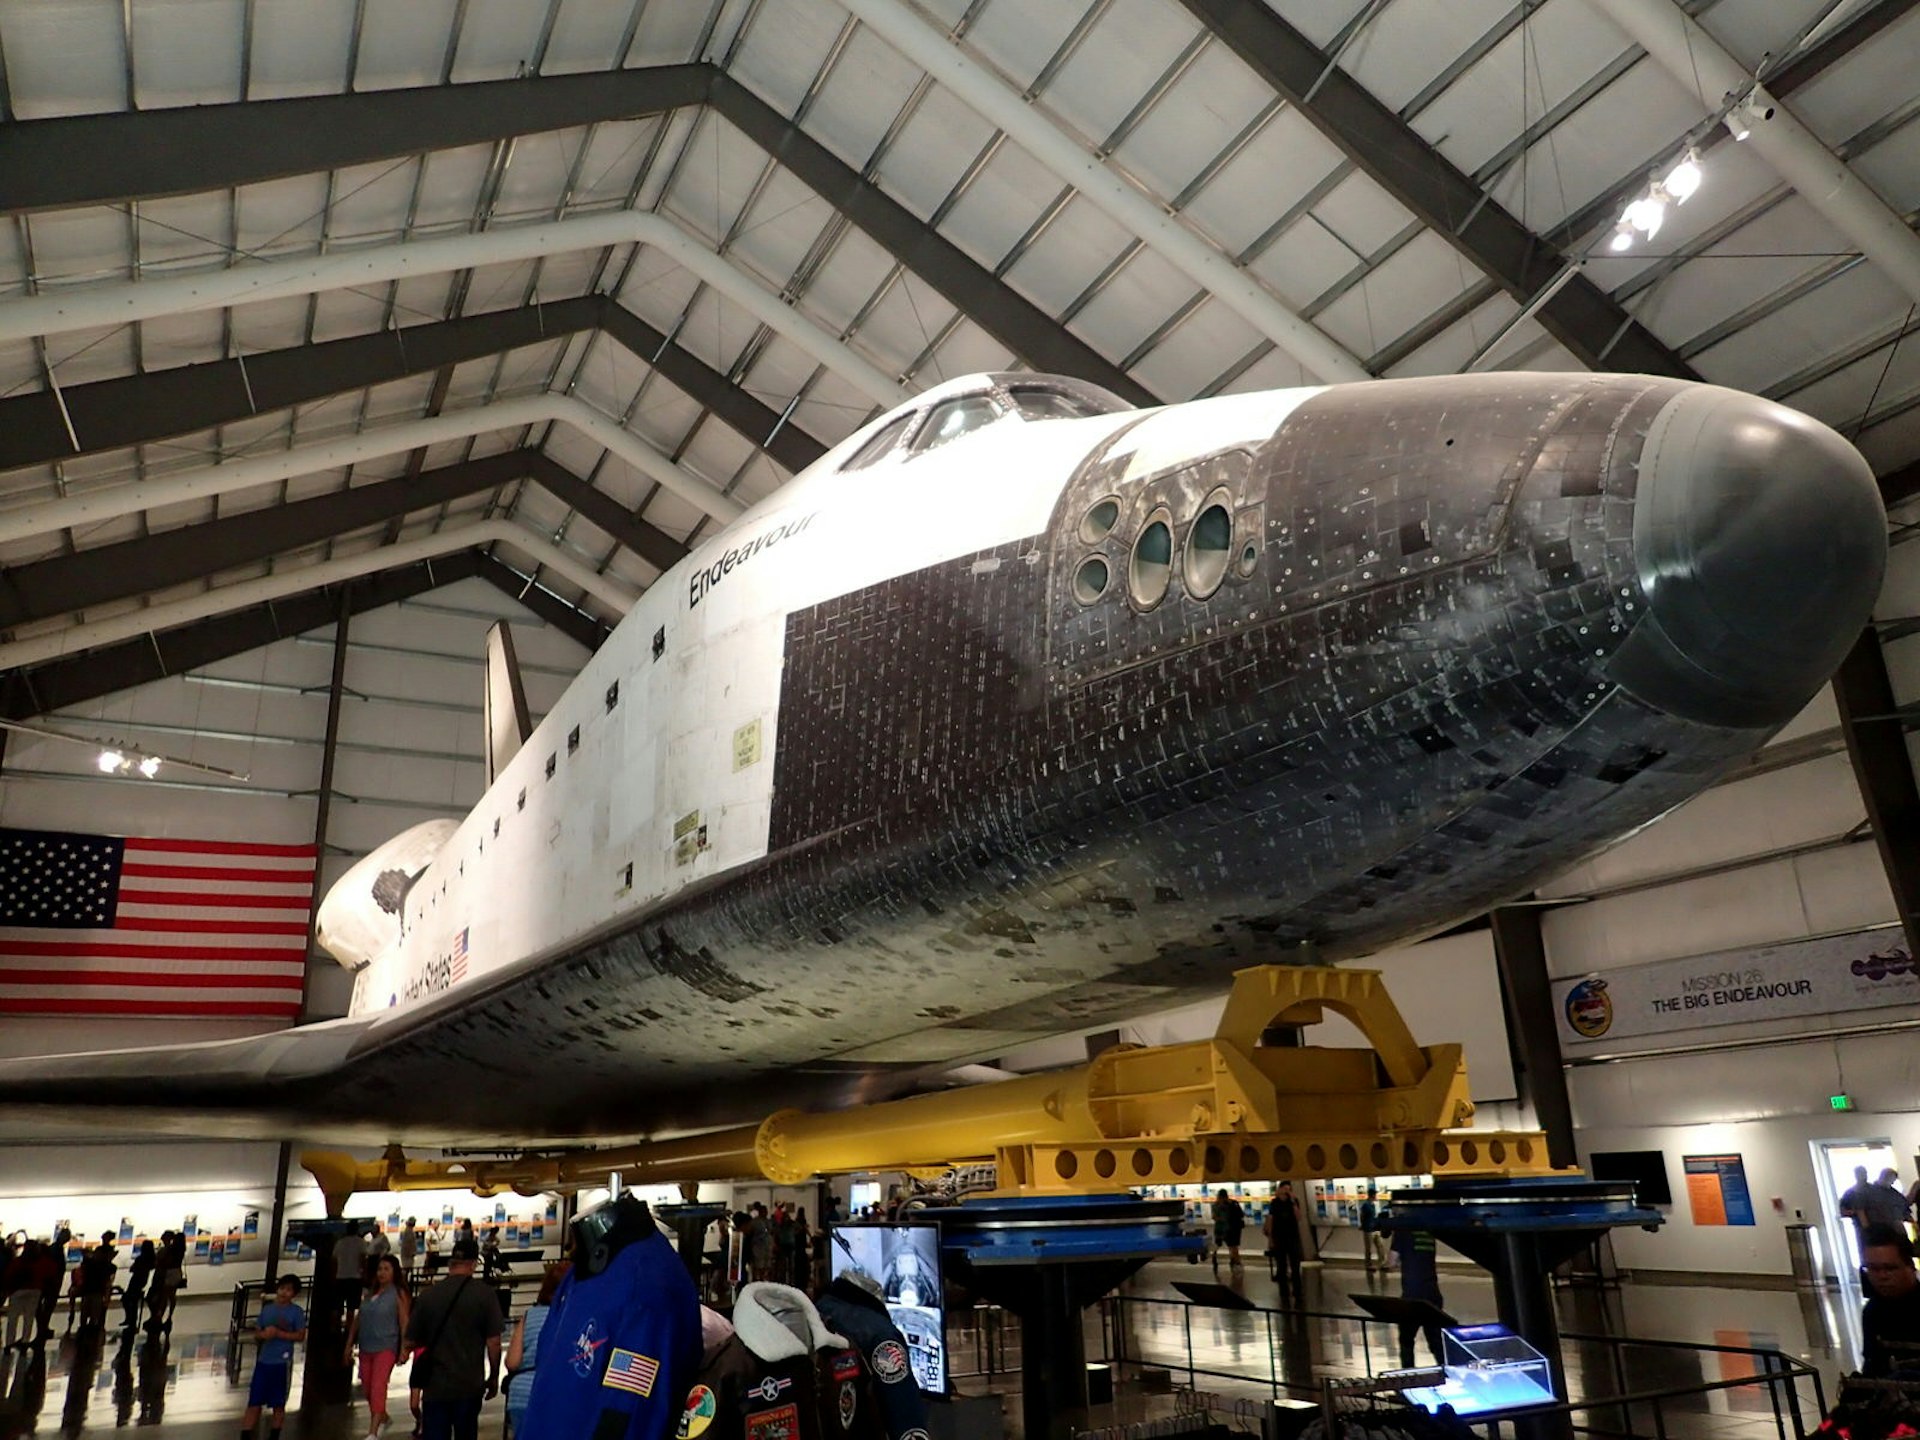 Pride of place in the California Science Center goes to the Space Shuttle Endeavour © Tim Richards / Loney Planet